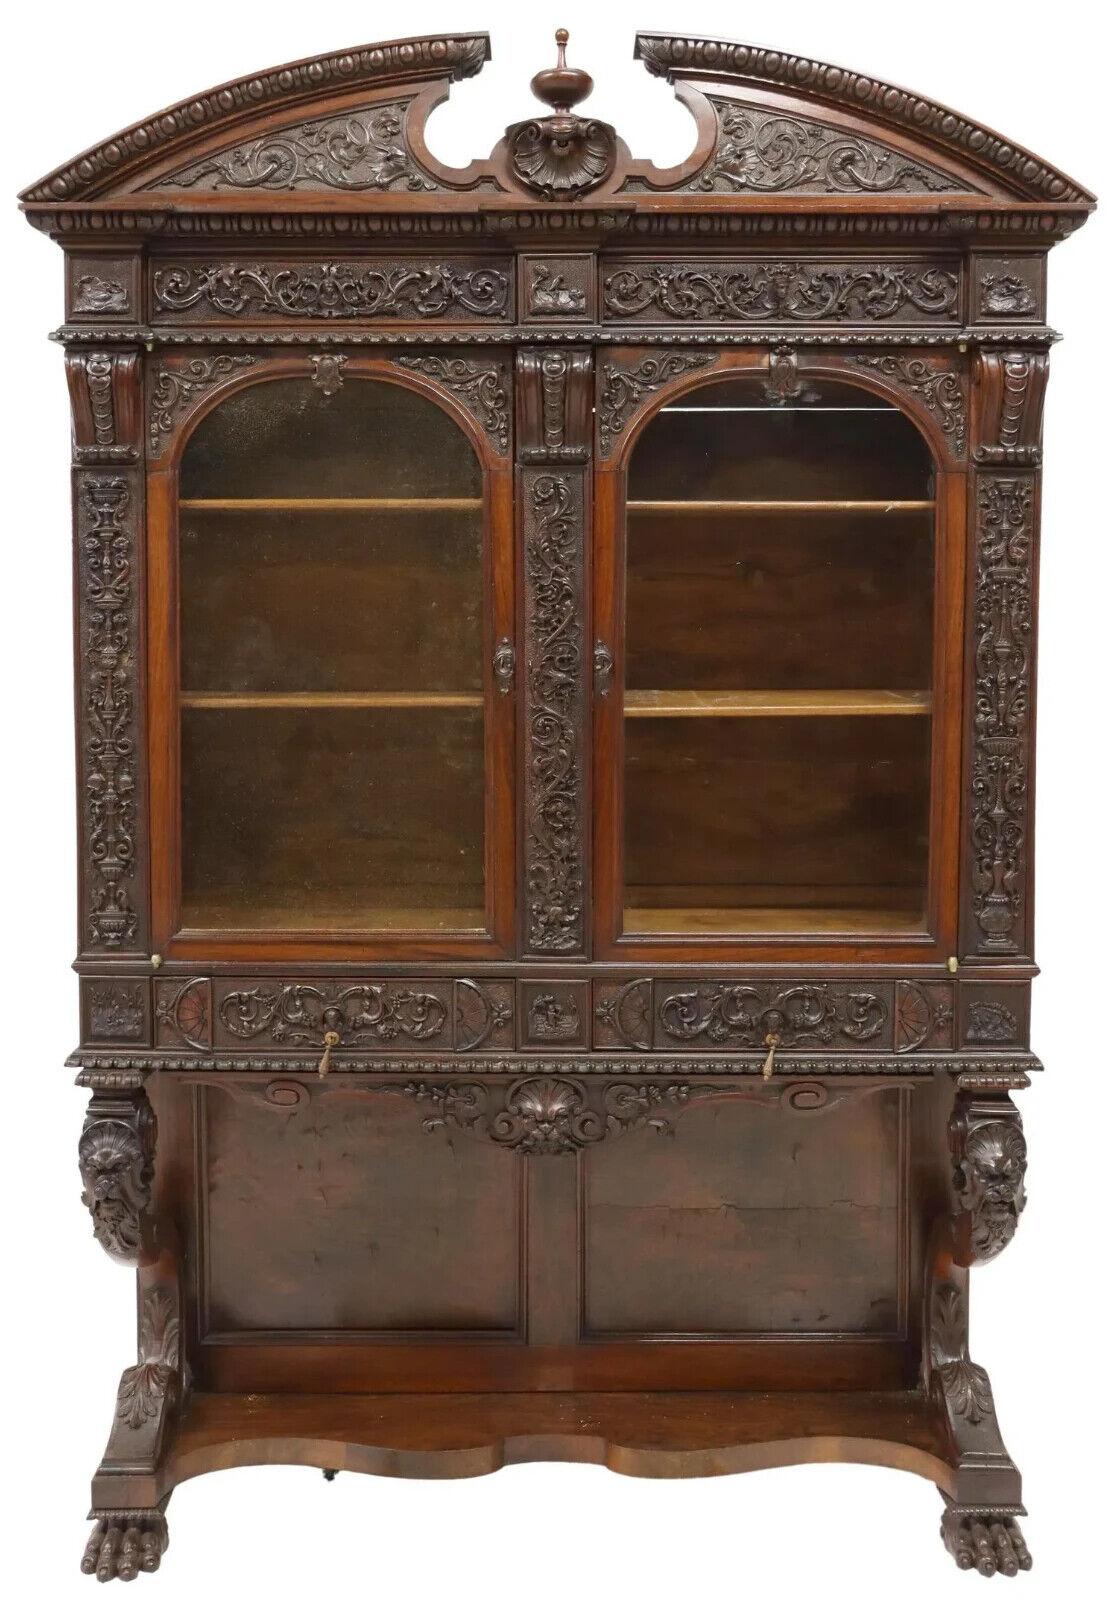 1800s Antique Renaissance Revival, Carved Display Cabinet / Vitrine
Beautiful Antique display cabinet, Vitrine, Renaissance Revival, carved, 19th Century, 1800s!!

Renaissance Revival carved vitrine/ display cabinet, 19th Century, the whole finely